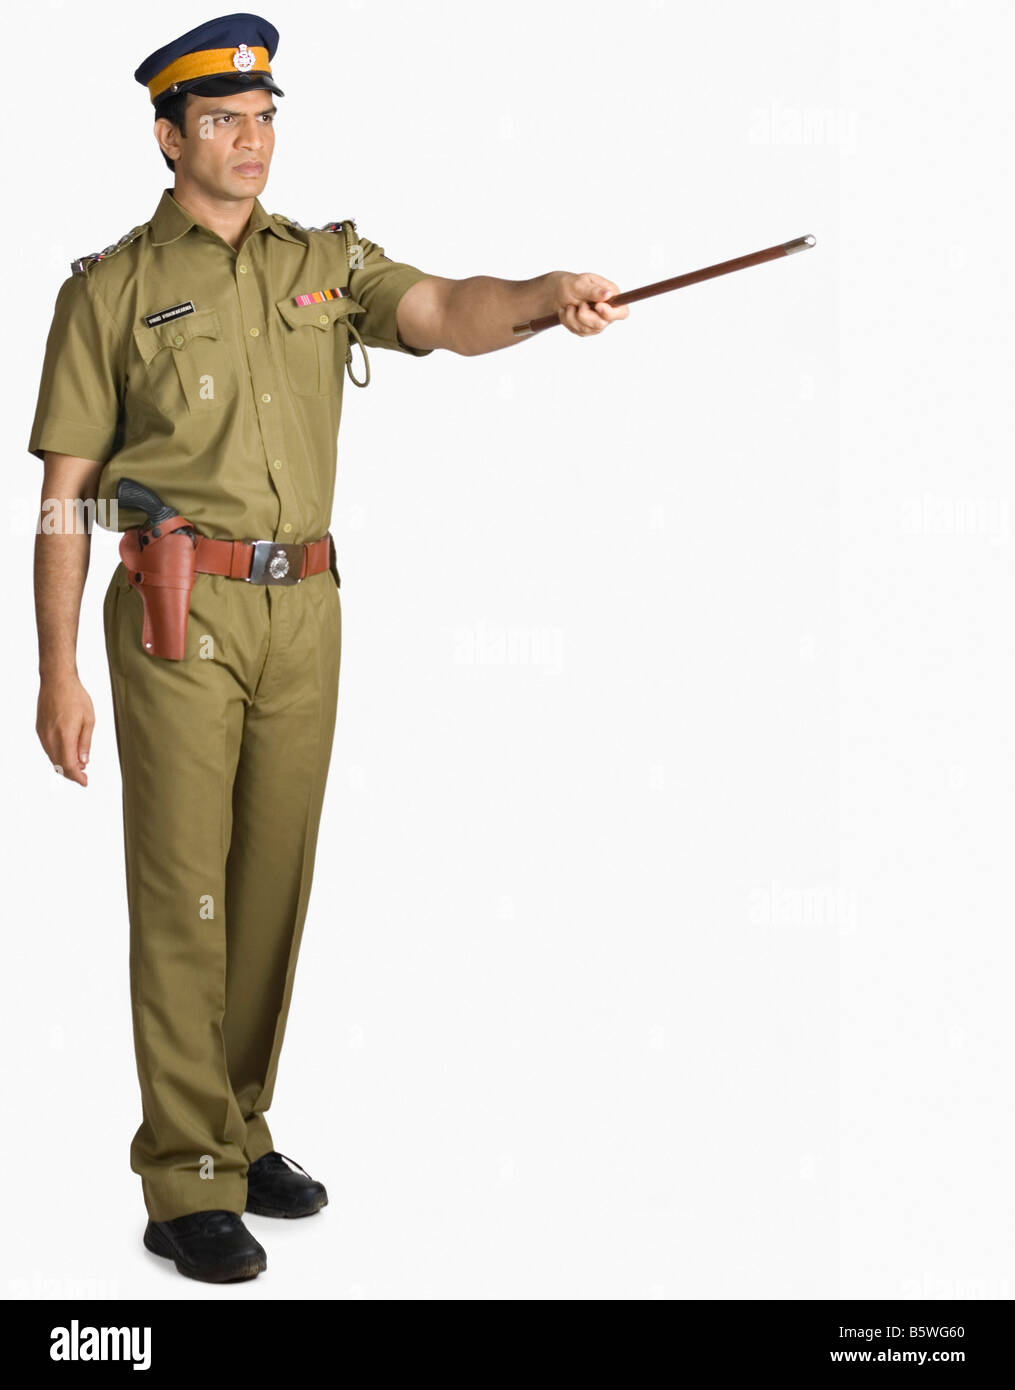 Indian police officer Cut Out Stock Images & Pictures - Alamy